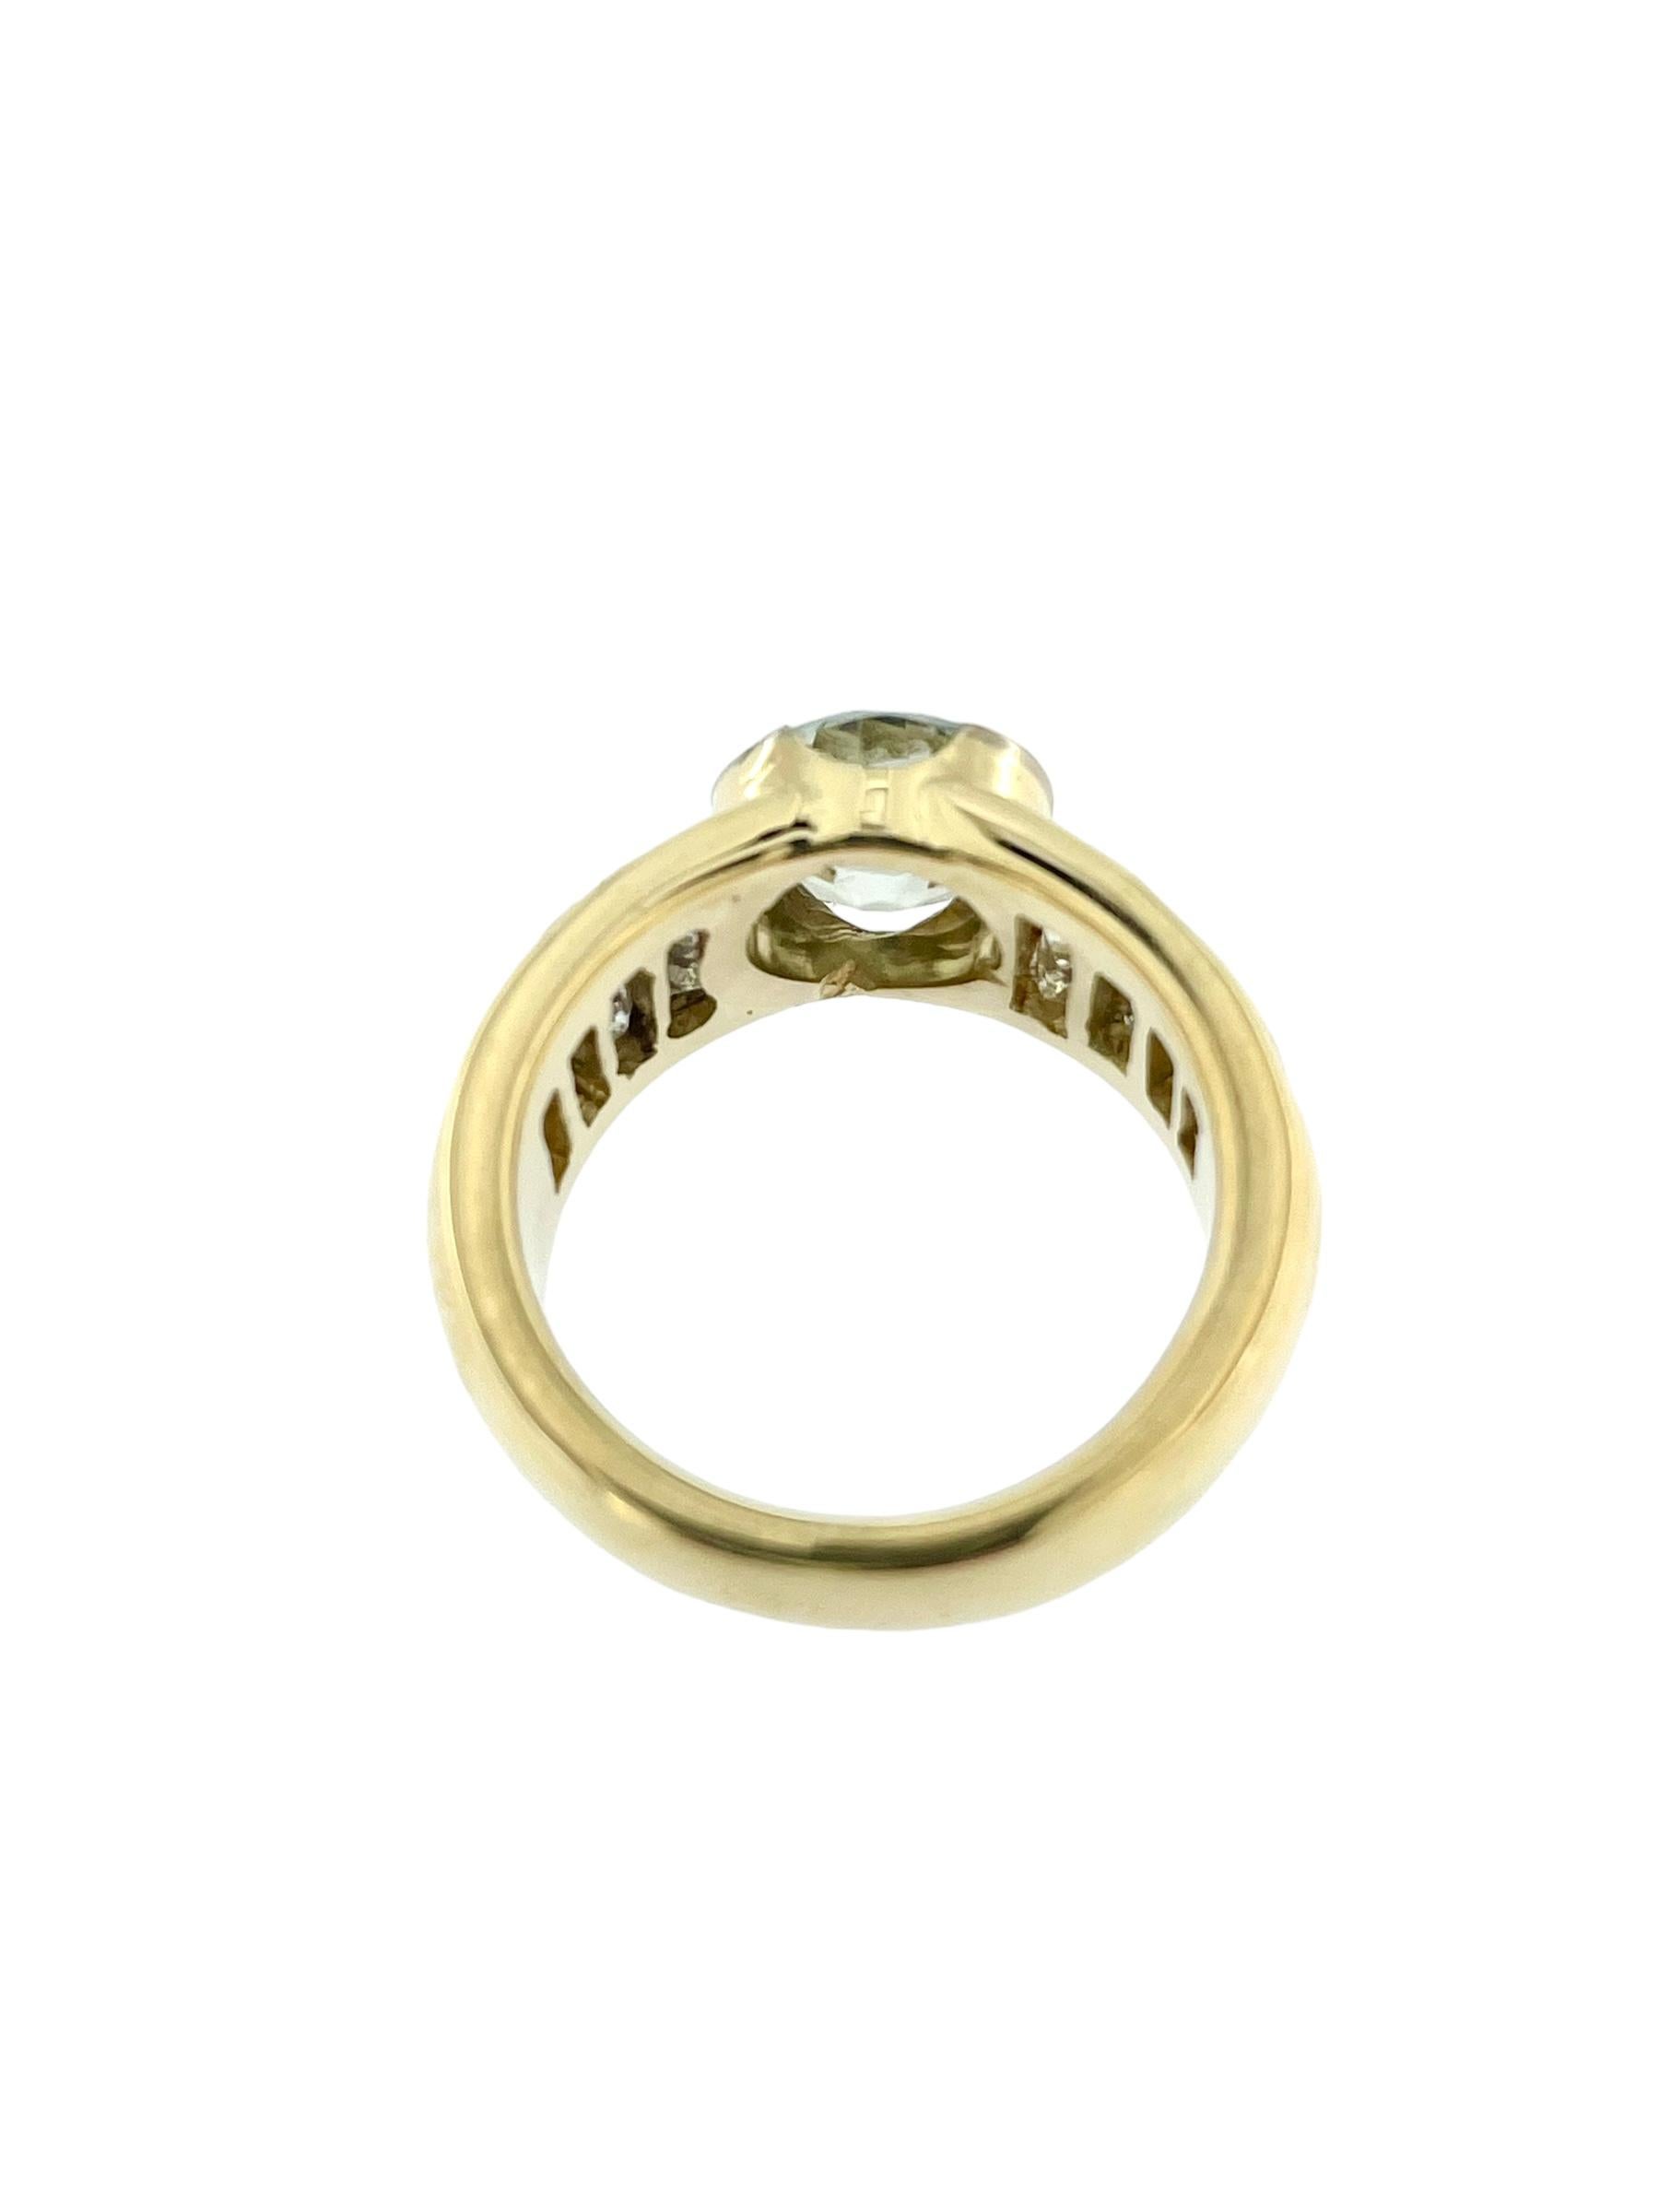 Retro Italian Yellow Gold Ring with Peridot and Diamonds For Sale 4